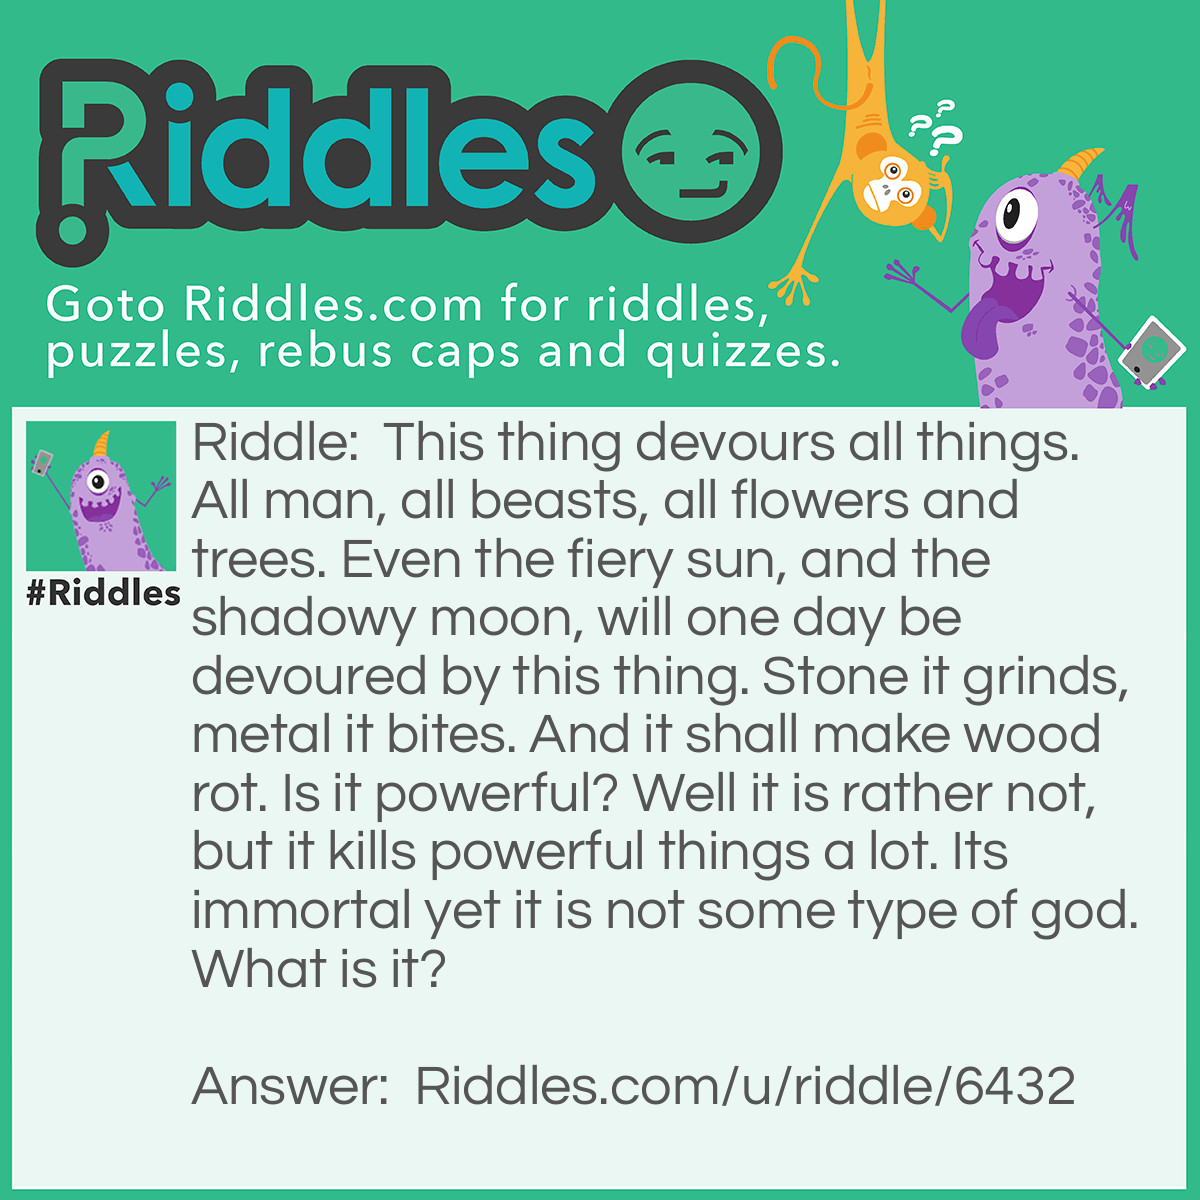 Riddle: This thing devours all things. All man, all beasts, all flowers and trees. Even the fiery sun, and the shadowy moon, will one day be devoured by this thing. Stone it grinds, metal it bites. And it shall make wood rot. Is it powerful? Well it is rather not, but it kills powerful things a lot. Its immortal yet it is not some type of god. What is it? Answer: Time.